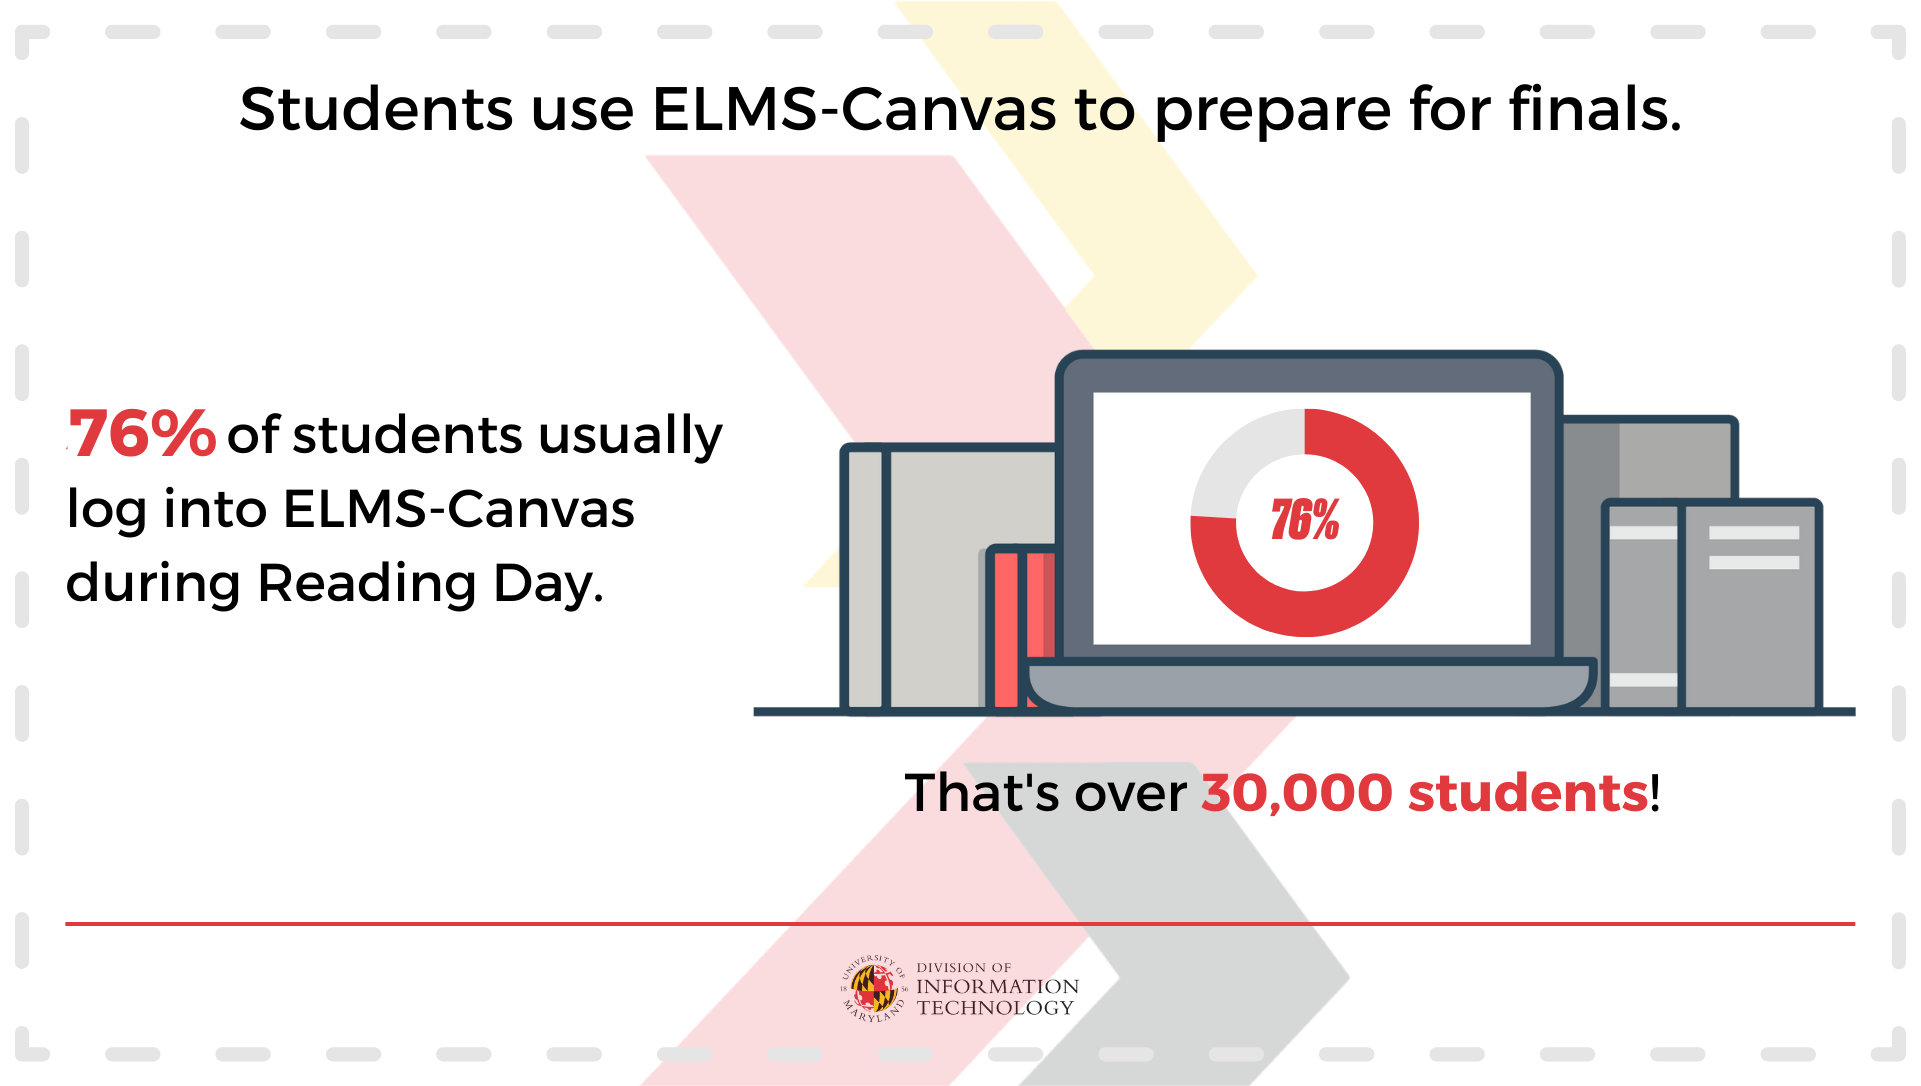 Students use ELMS-Canvas to prepare for finals. 76% of students usually log into LEMS-Canvas during Reading Day. That's over 30,000 students!